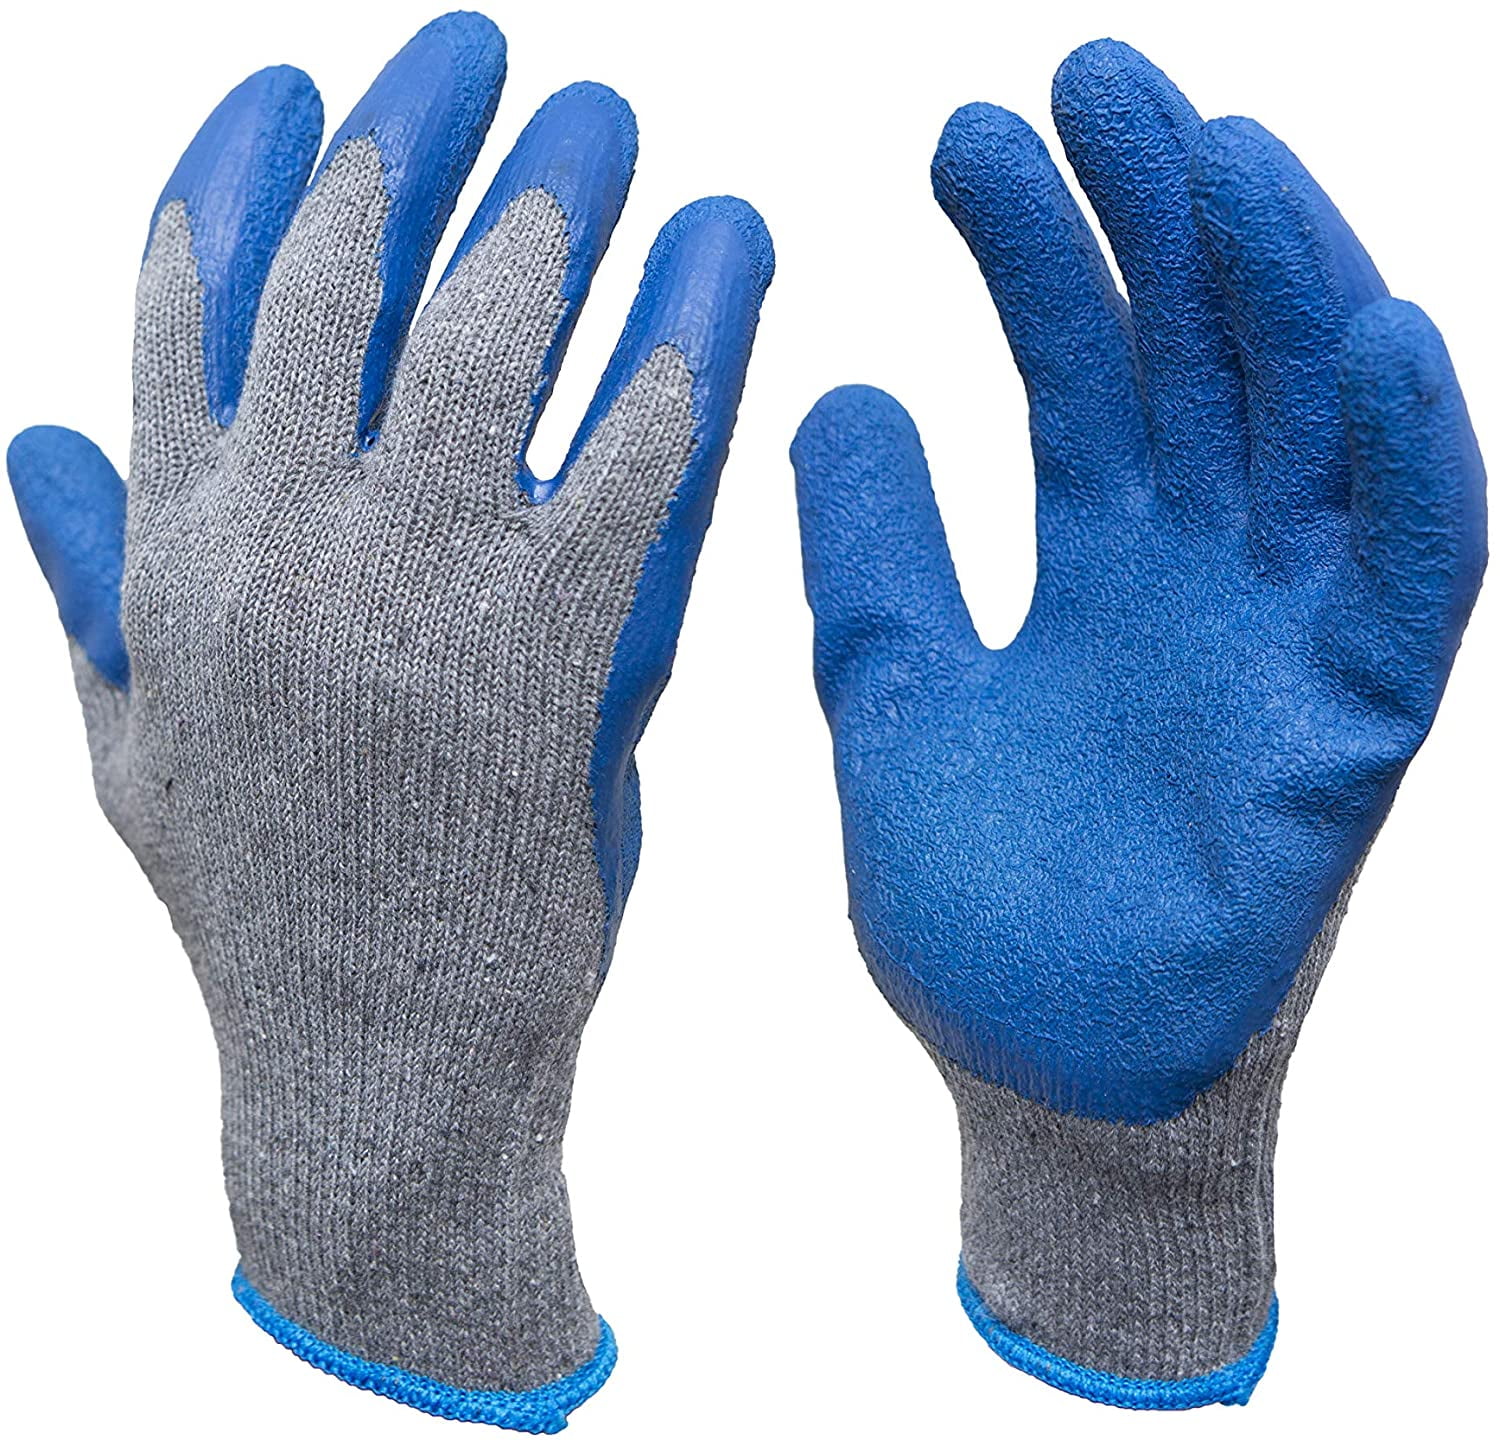 GlovBE 12 Pairs Work All-Purpose Gloves with Latex Coated Palm for Grip 